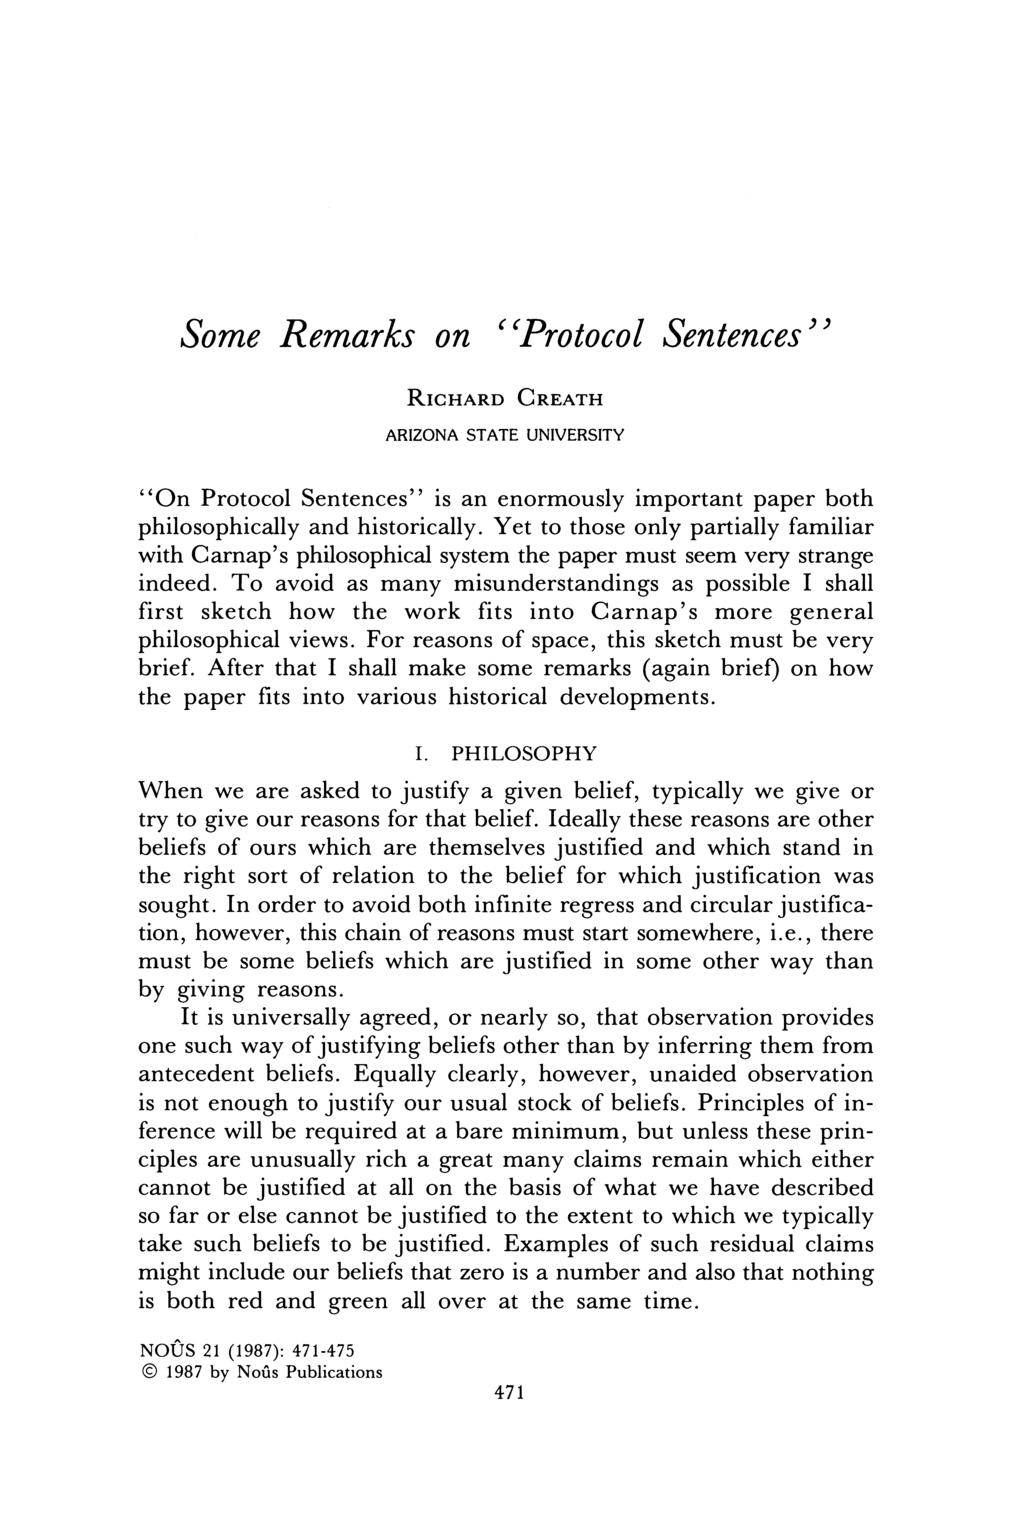 Some Remarks on "Protocol Sentences" RICHARD CREATH ARIZONA STATE UNIVERSITY "On Protocol Sentences" is an enormously important paper both philosophically and historically.